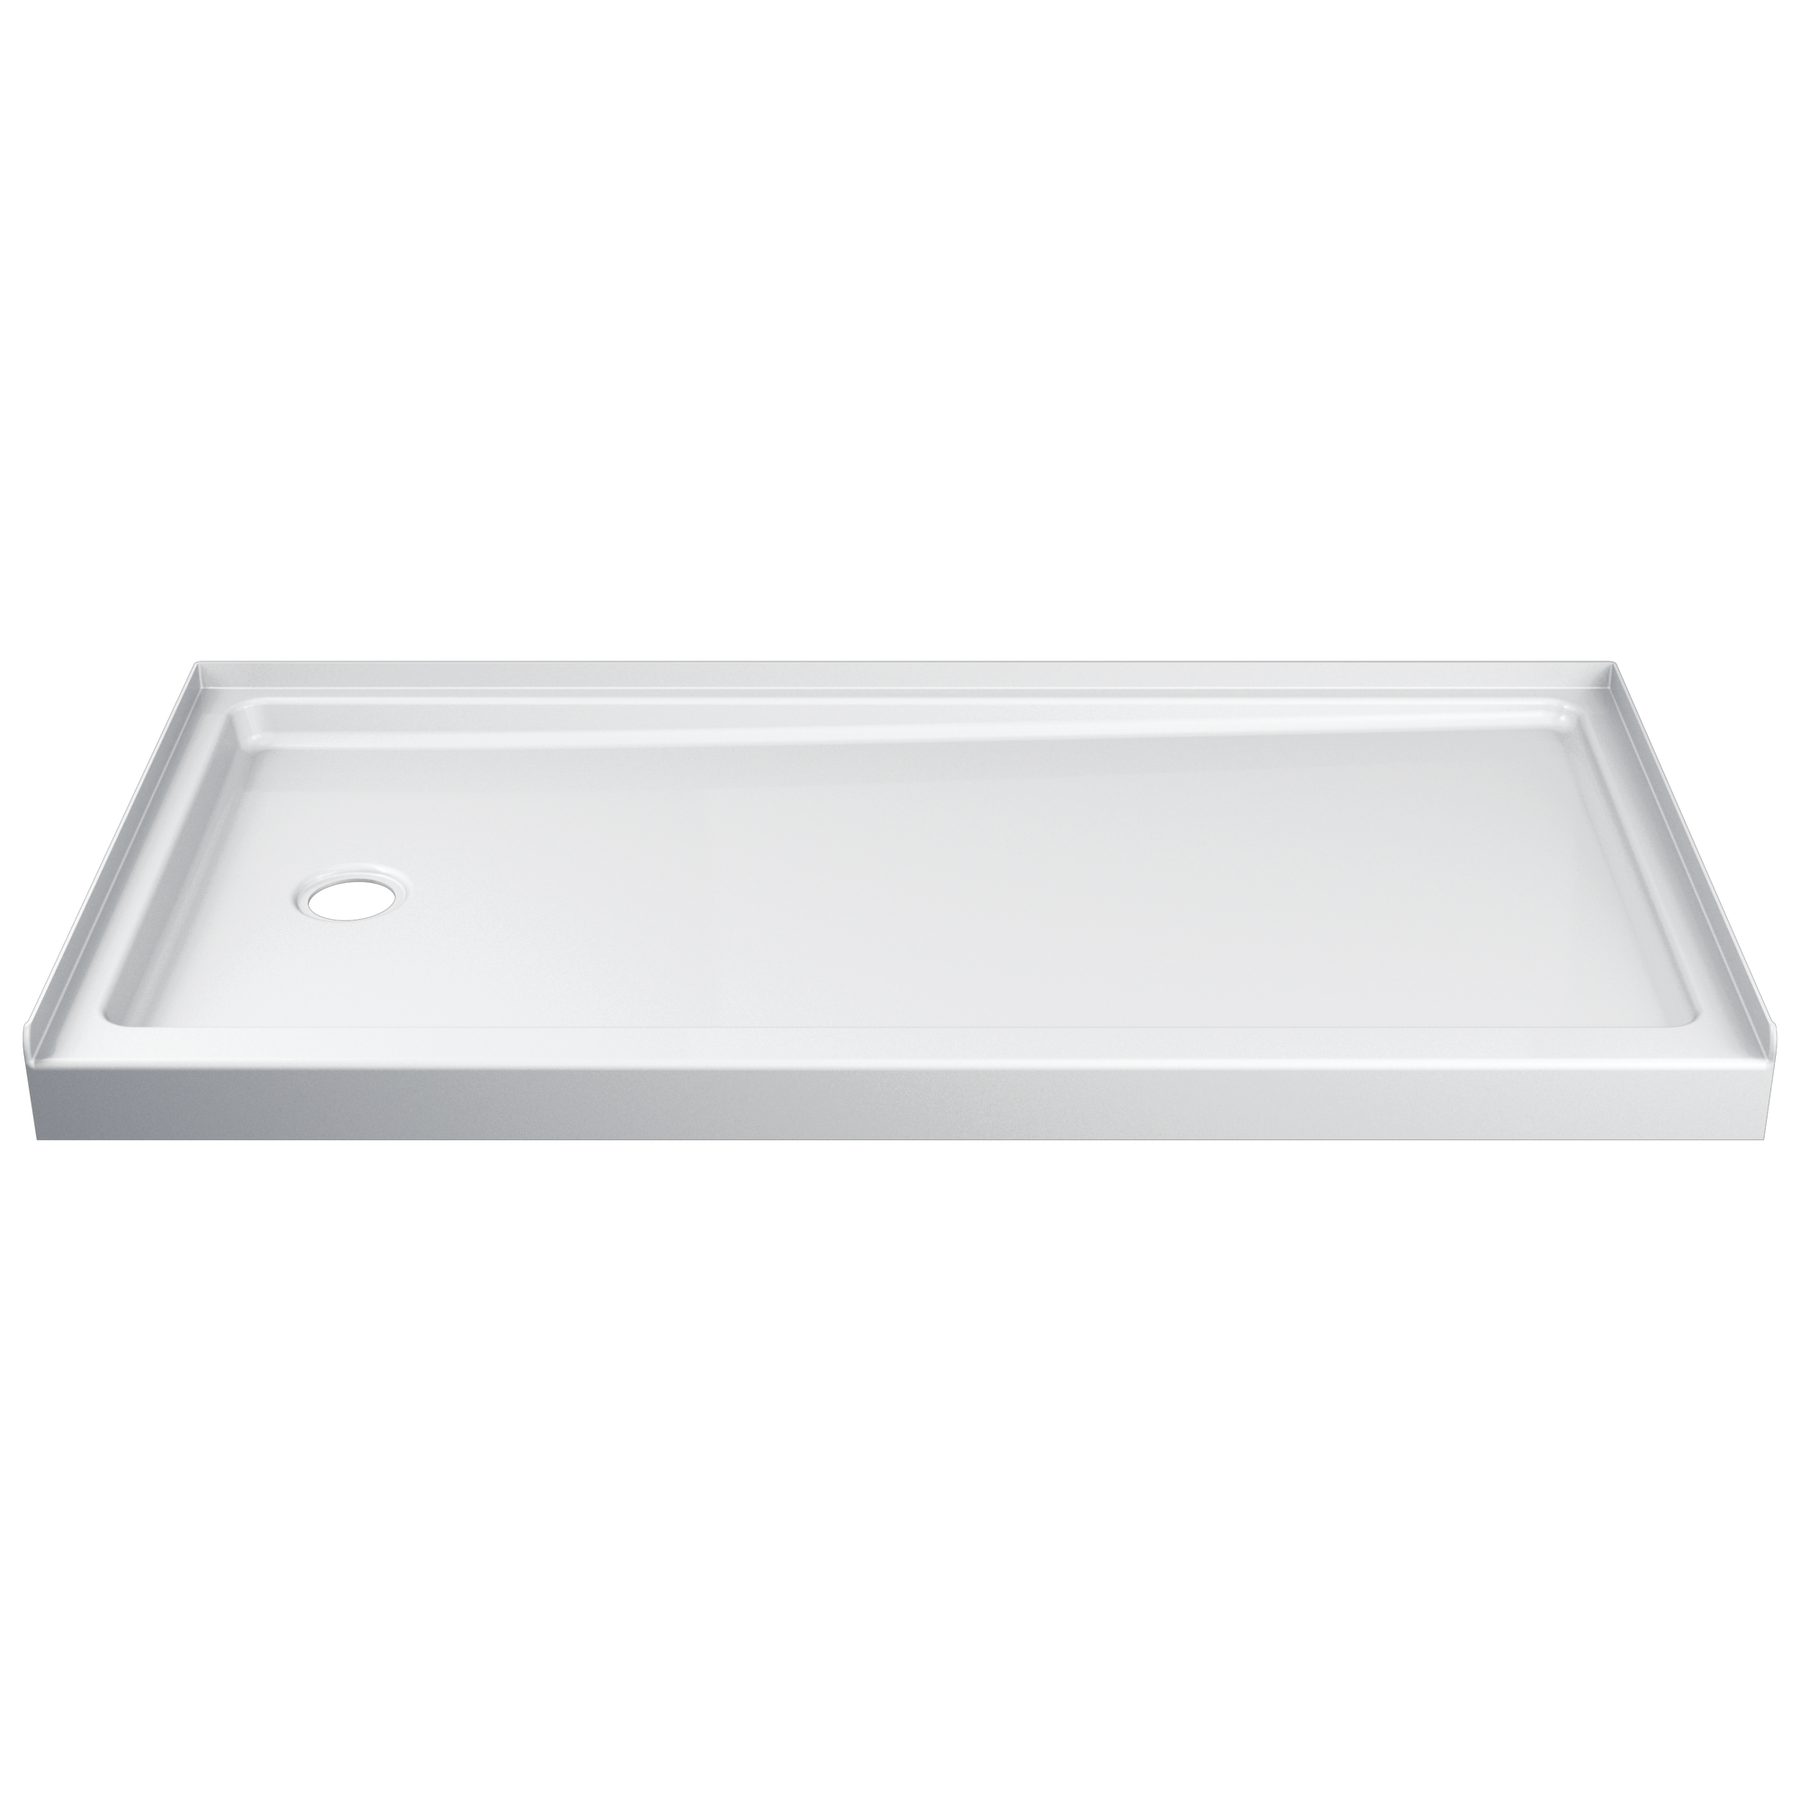 ProCrylic 60 in. x 30 | Delta Faucet Shower White Drain Left in in. Gloss High B78513-6030L-WH Base